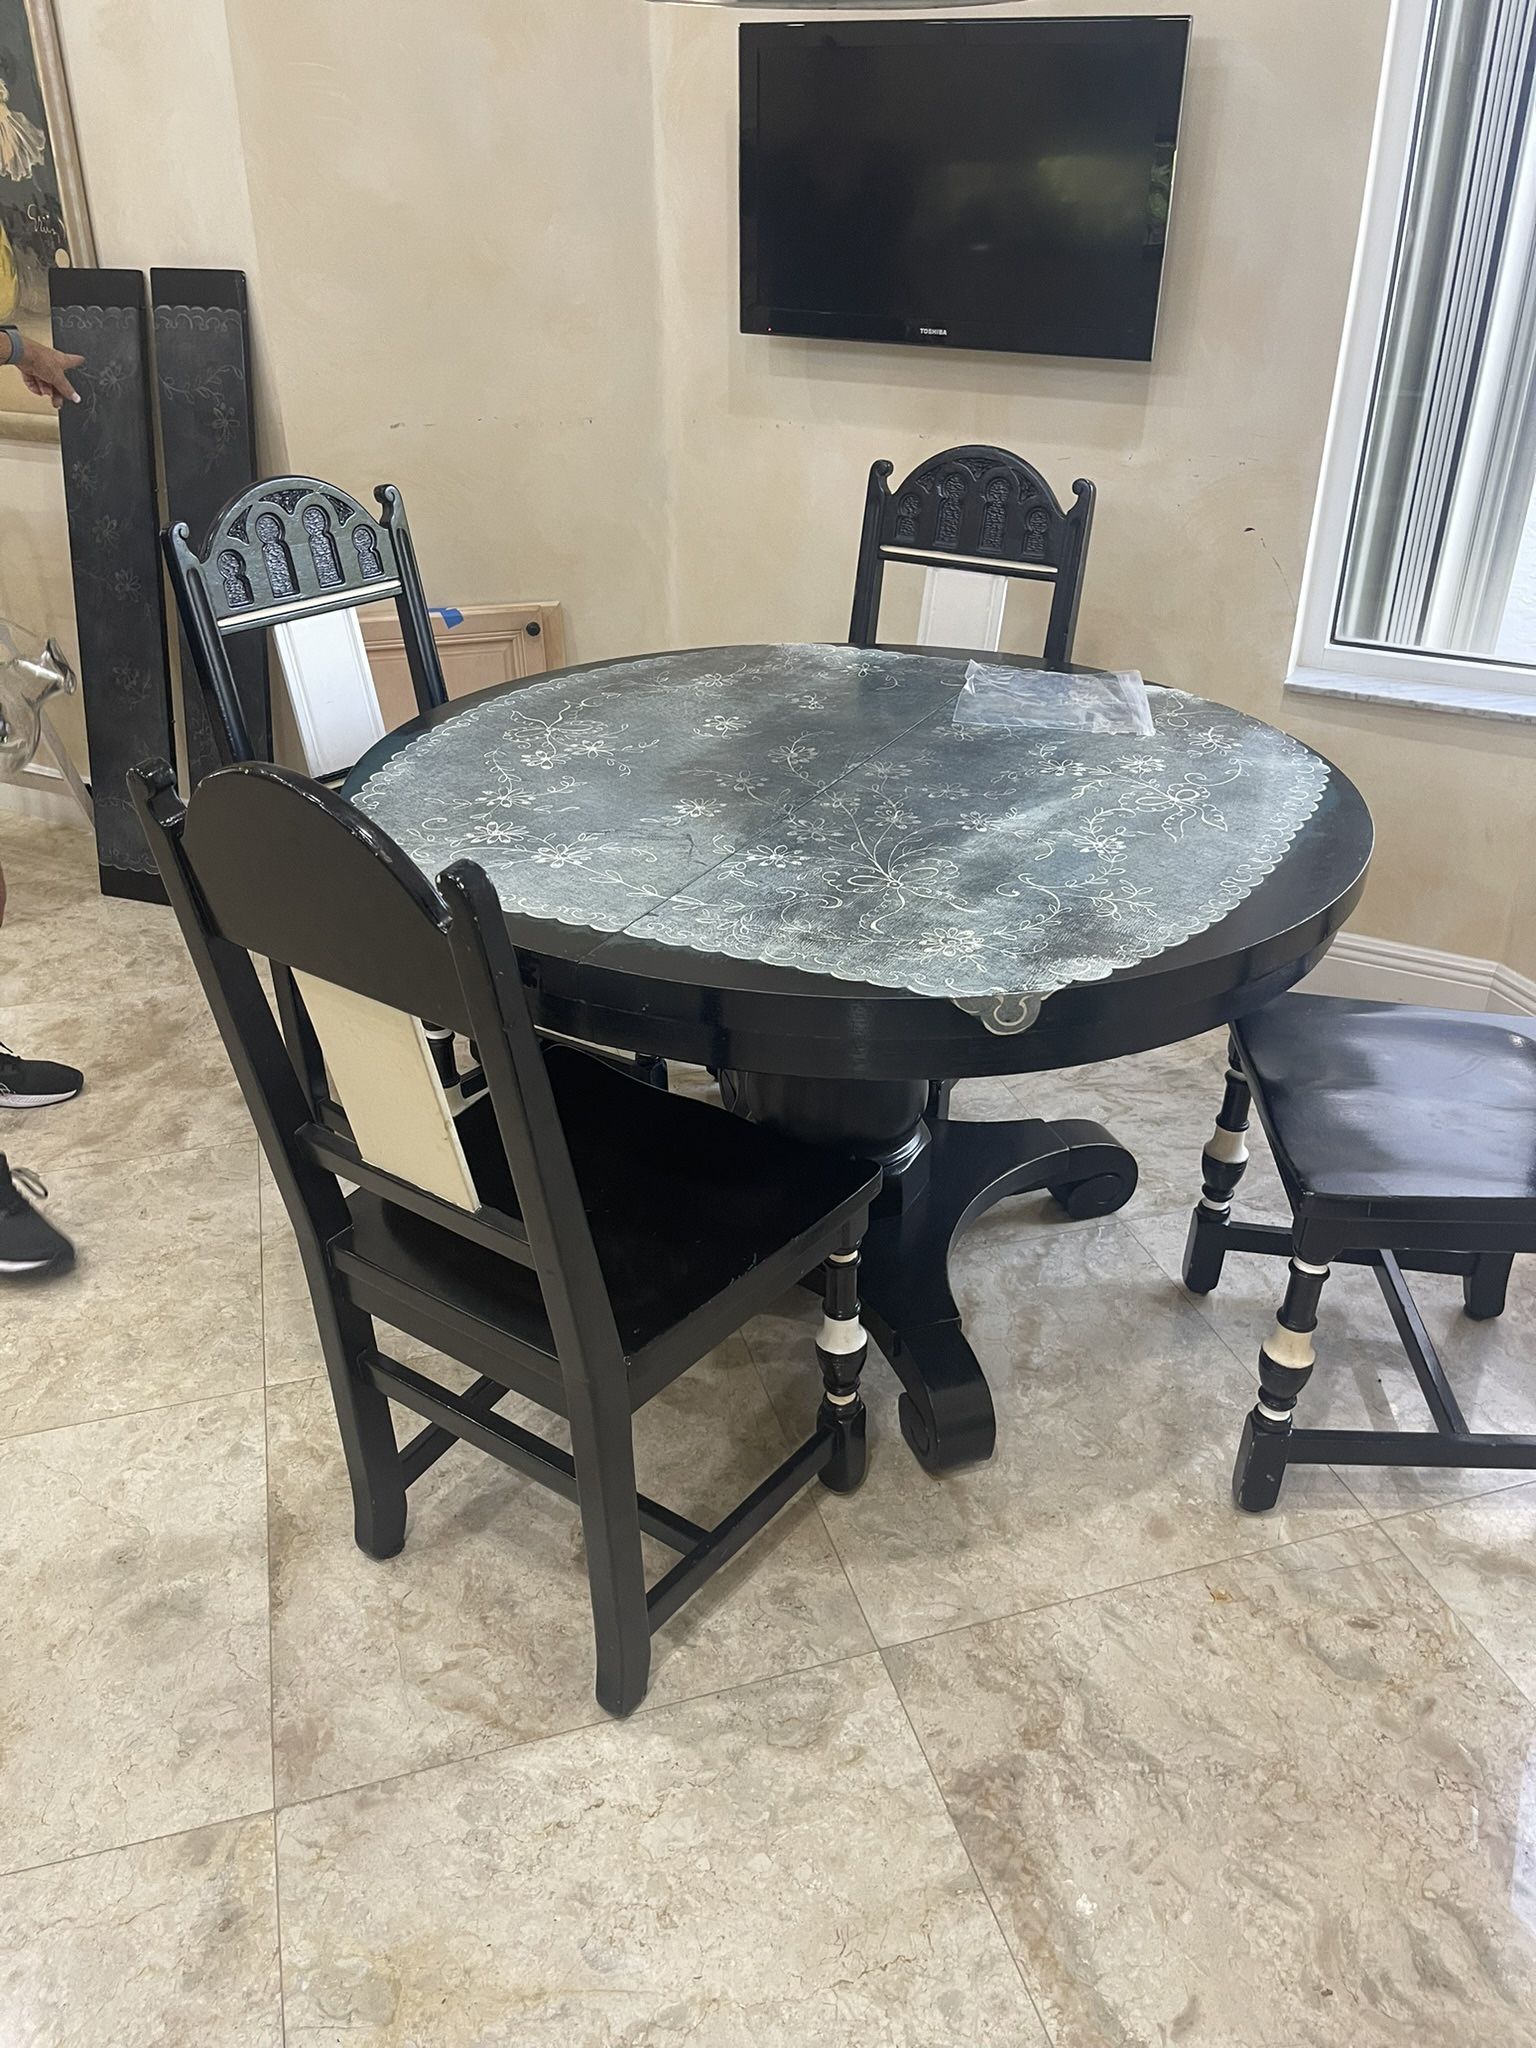 Vintage Kitchen Table W/ 4 Chairs - $100